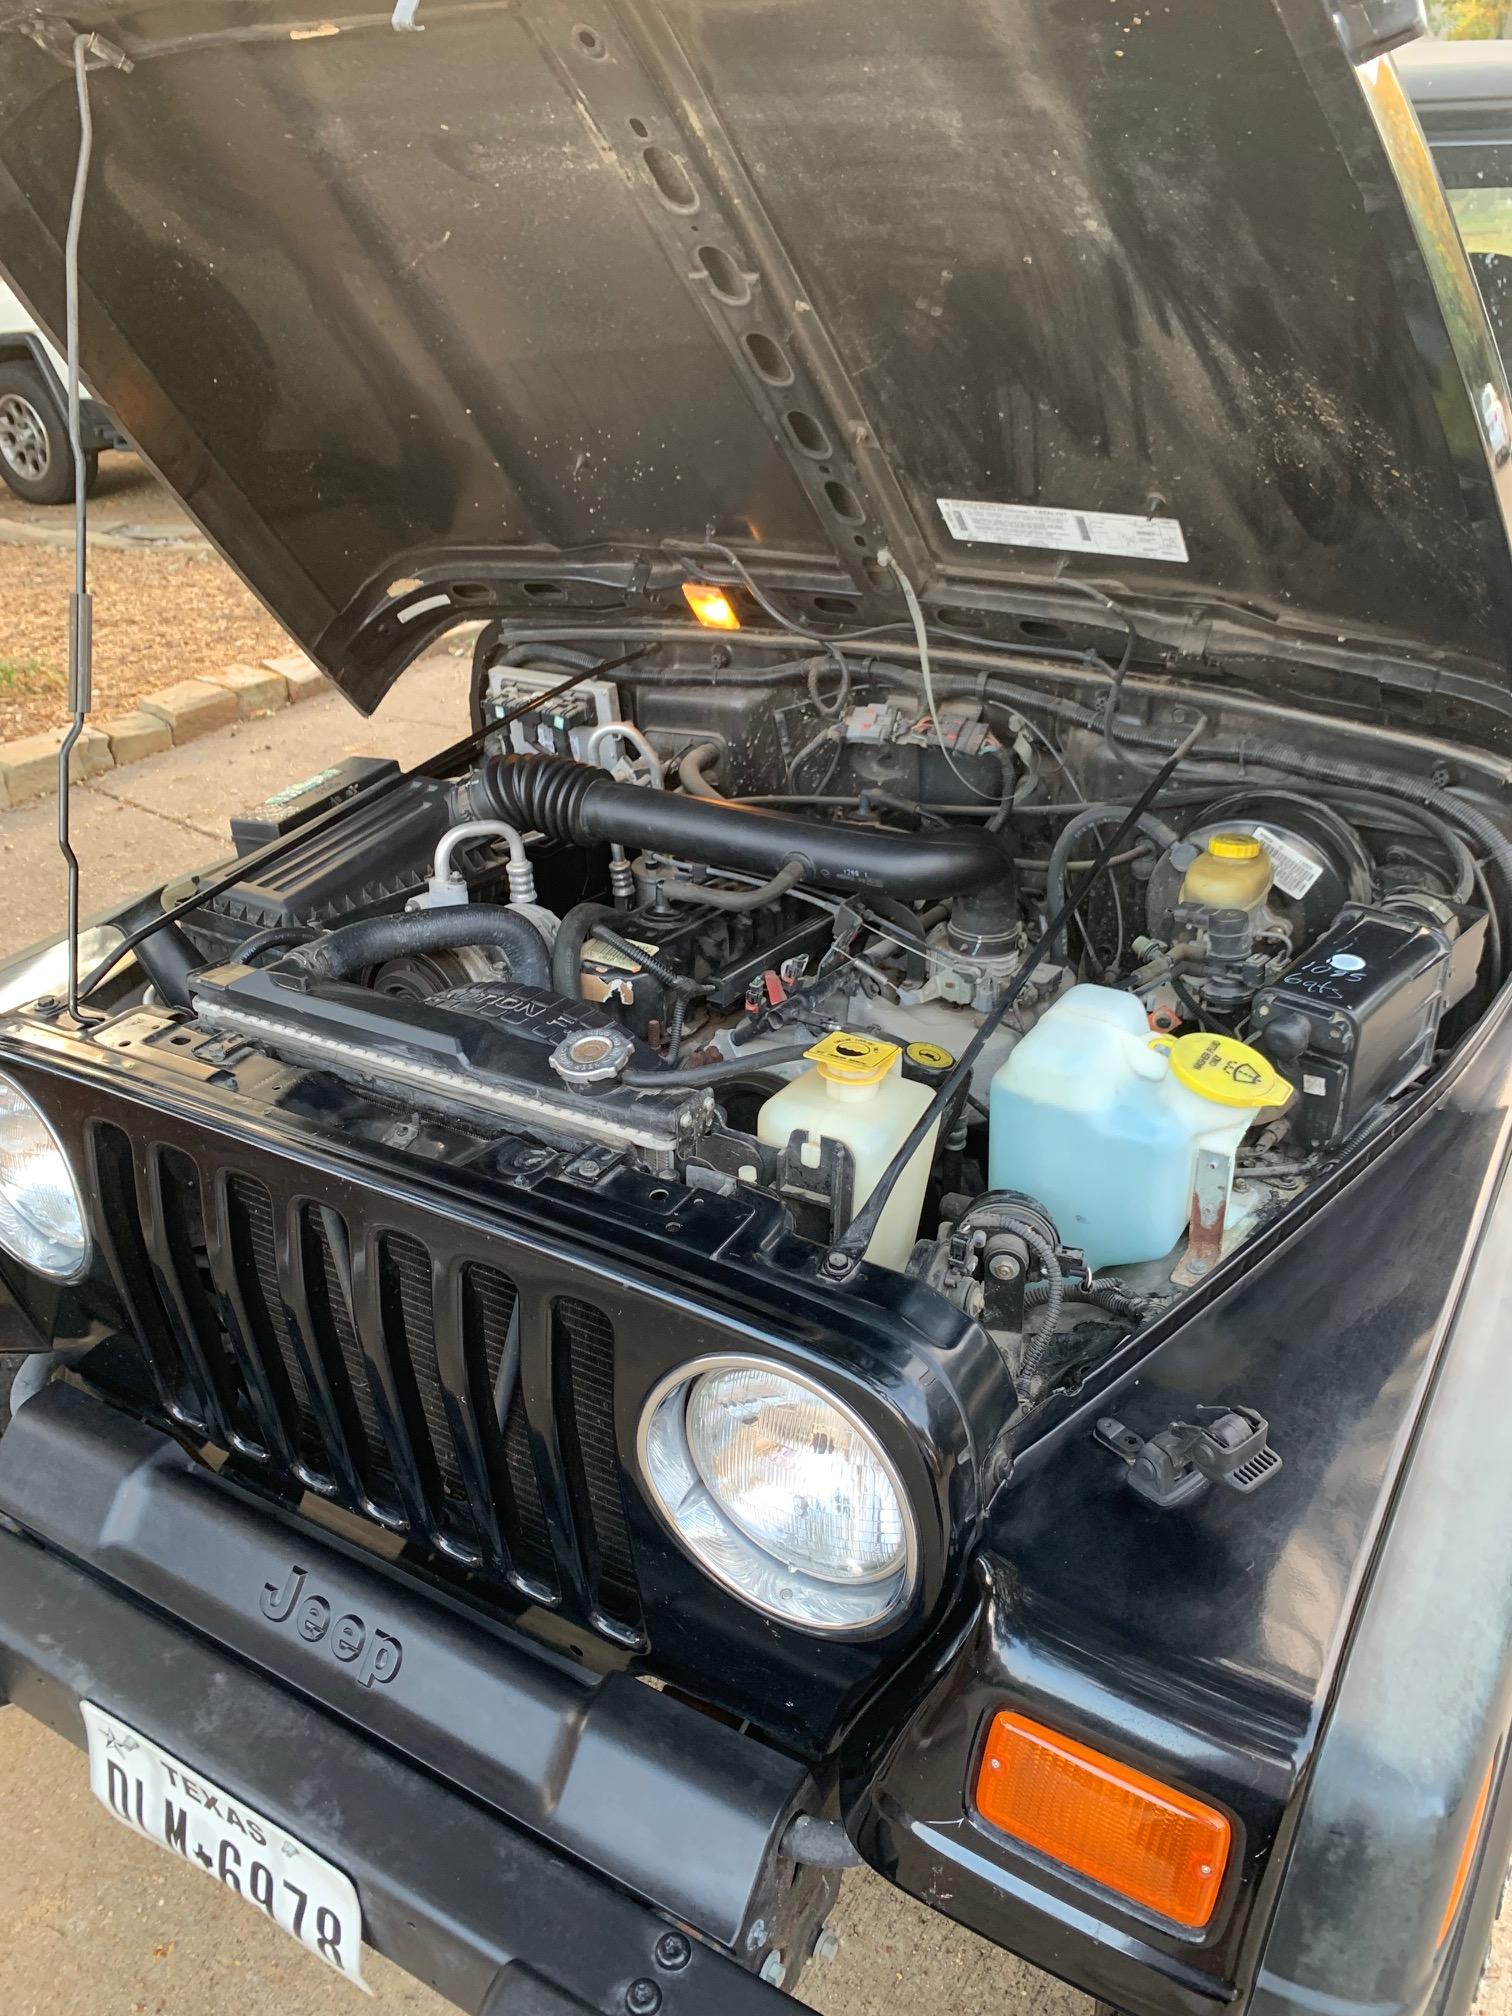 This 1999 Jeep Wrangler Is a One-Owner Gem With Low Miles - autoevolution